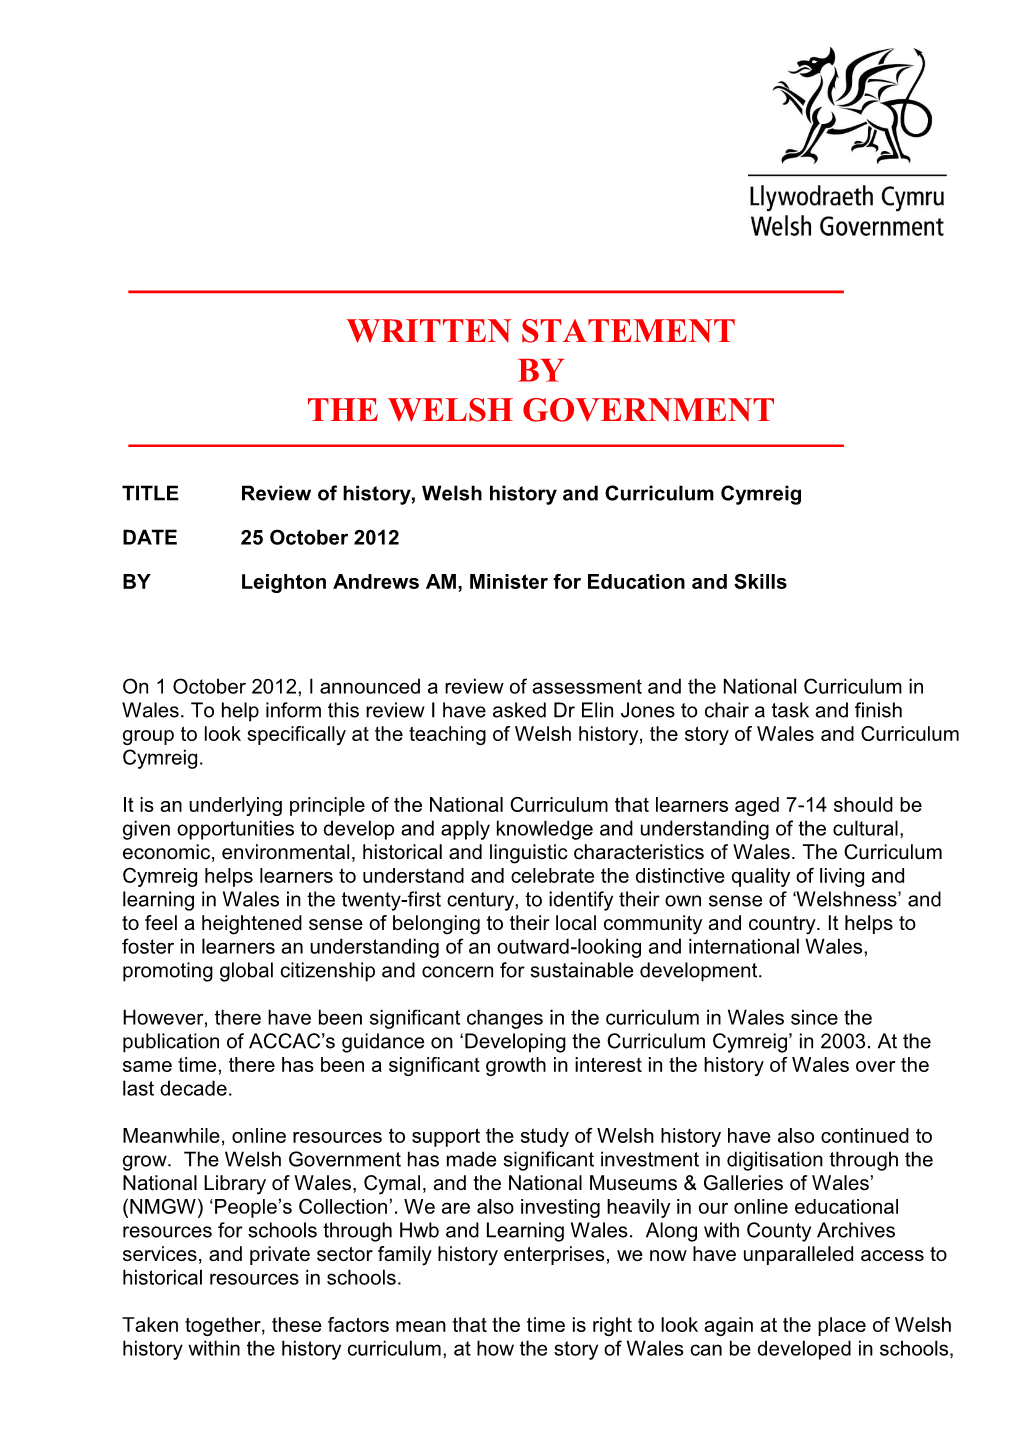 Review of History, Welsh History and Curriculum Cymreig (PDF, 159KB)